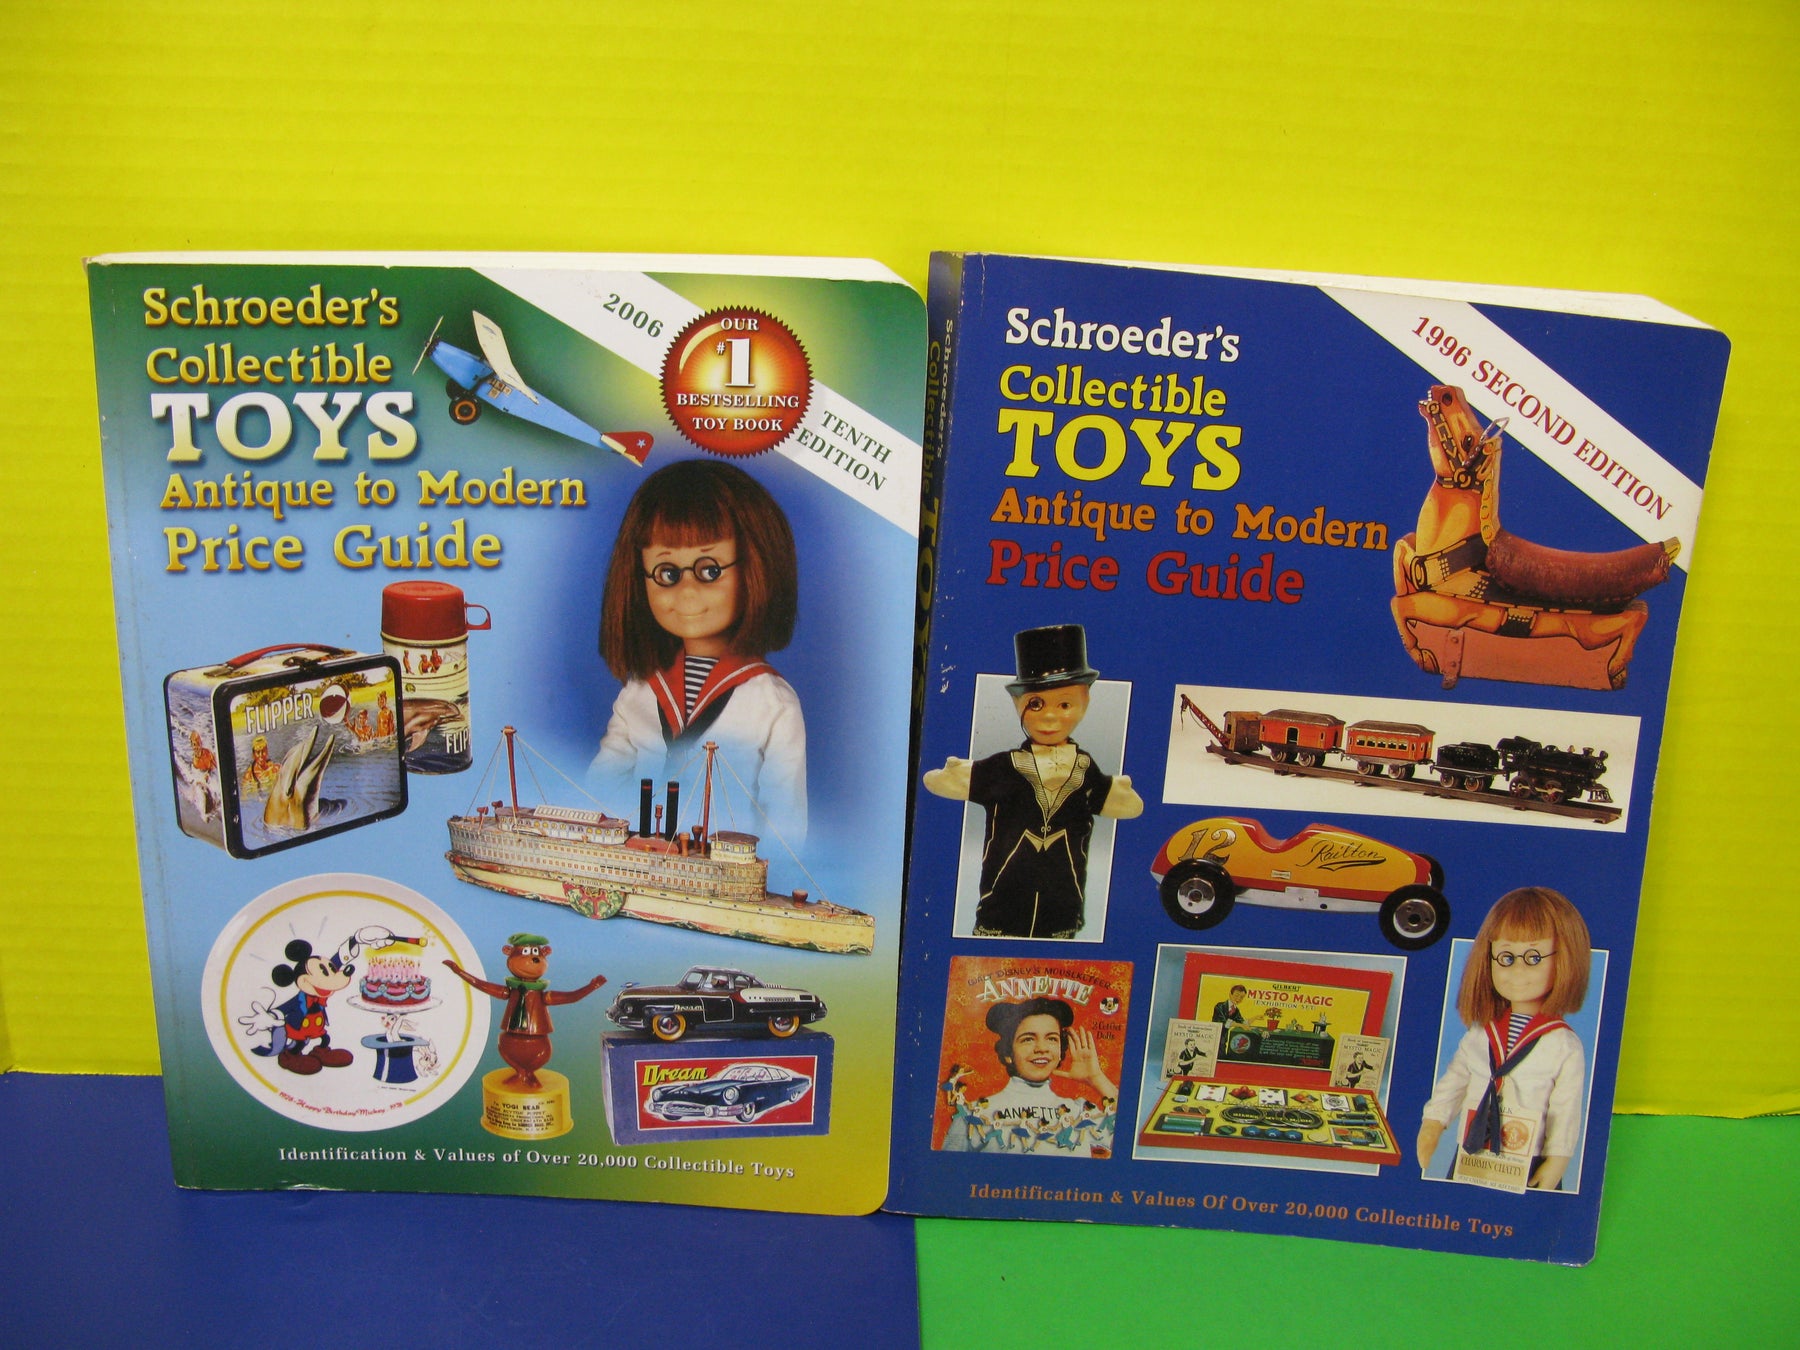 Schroeder's Collectible Toys Antique to Modern Price Guides